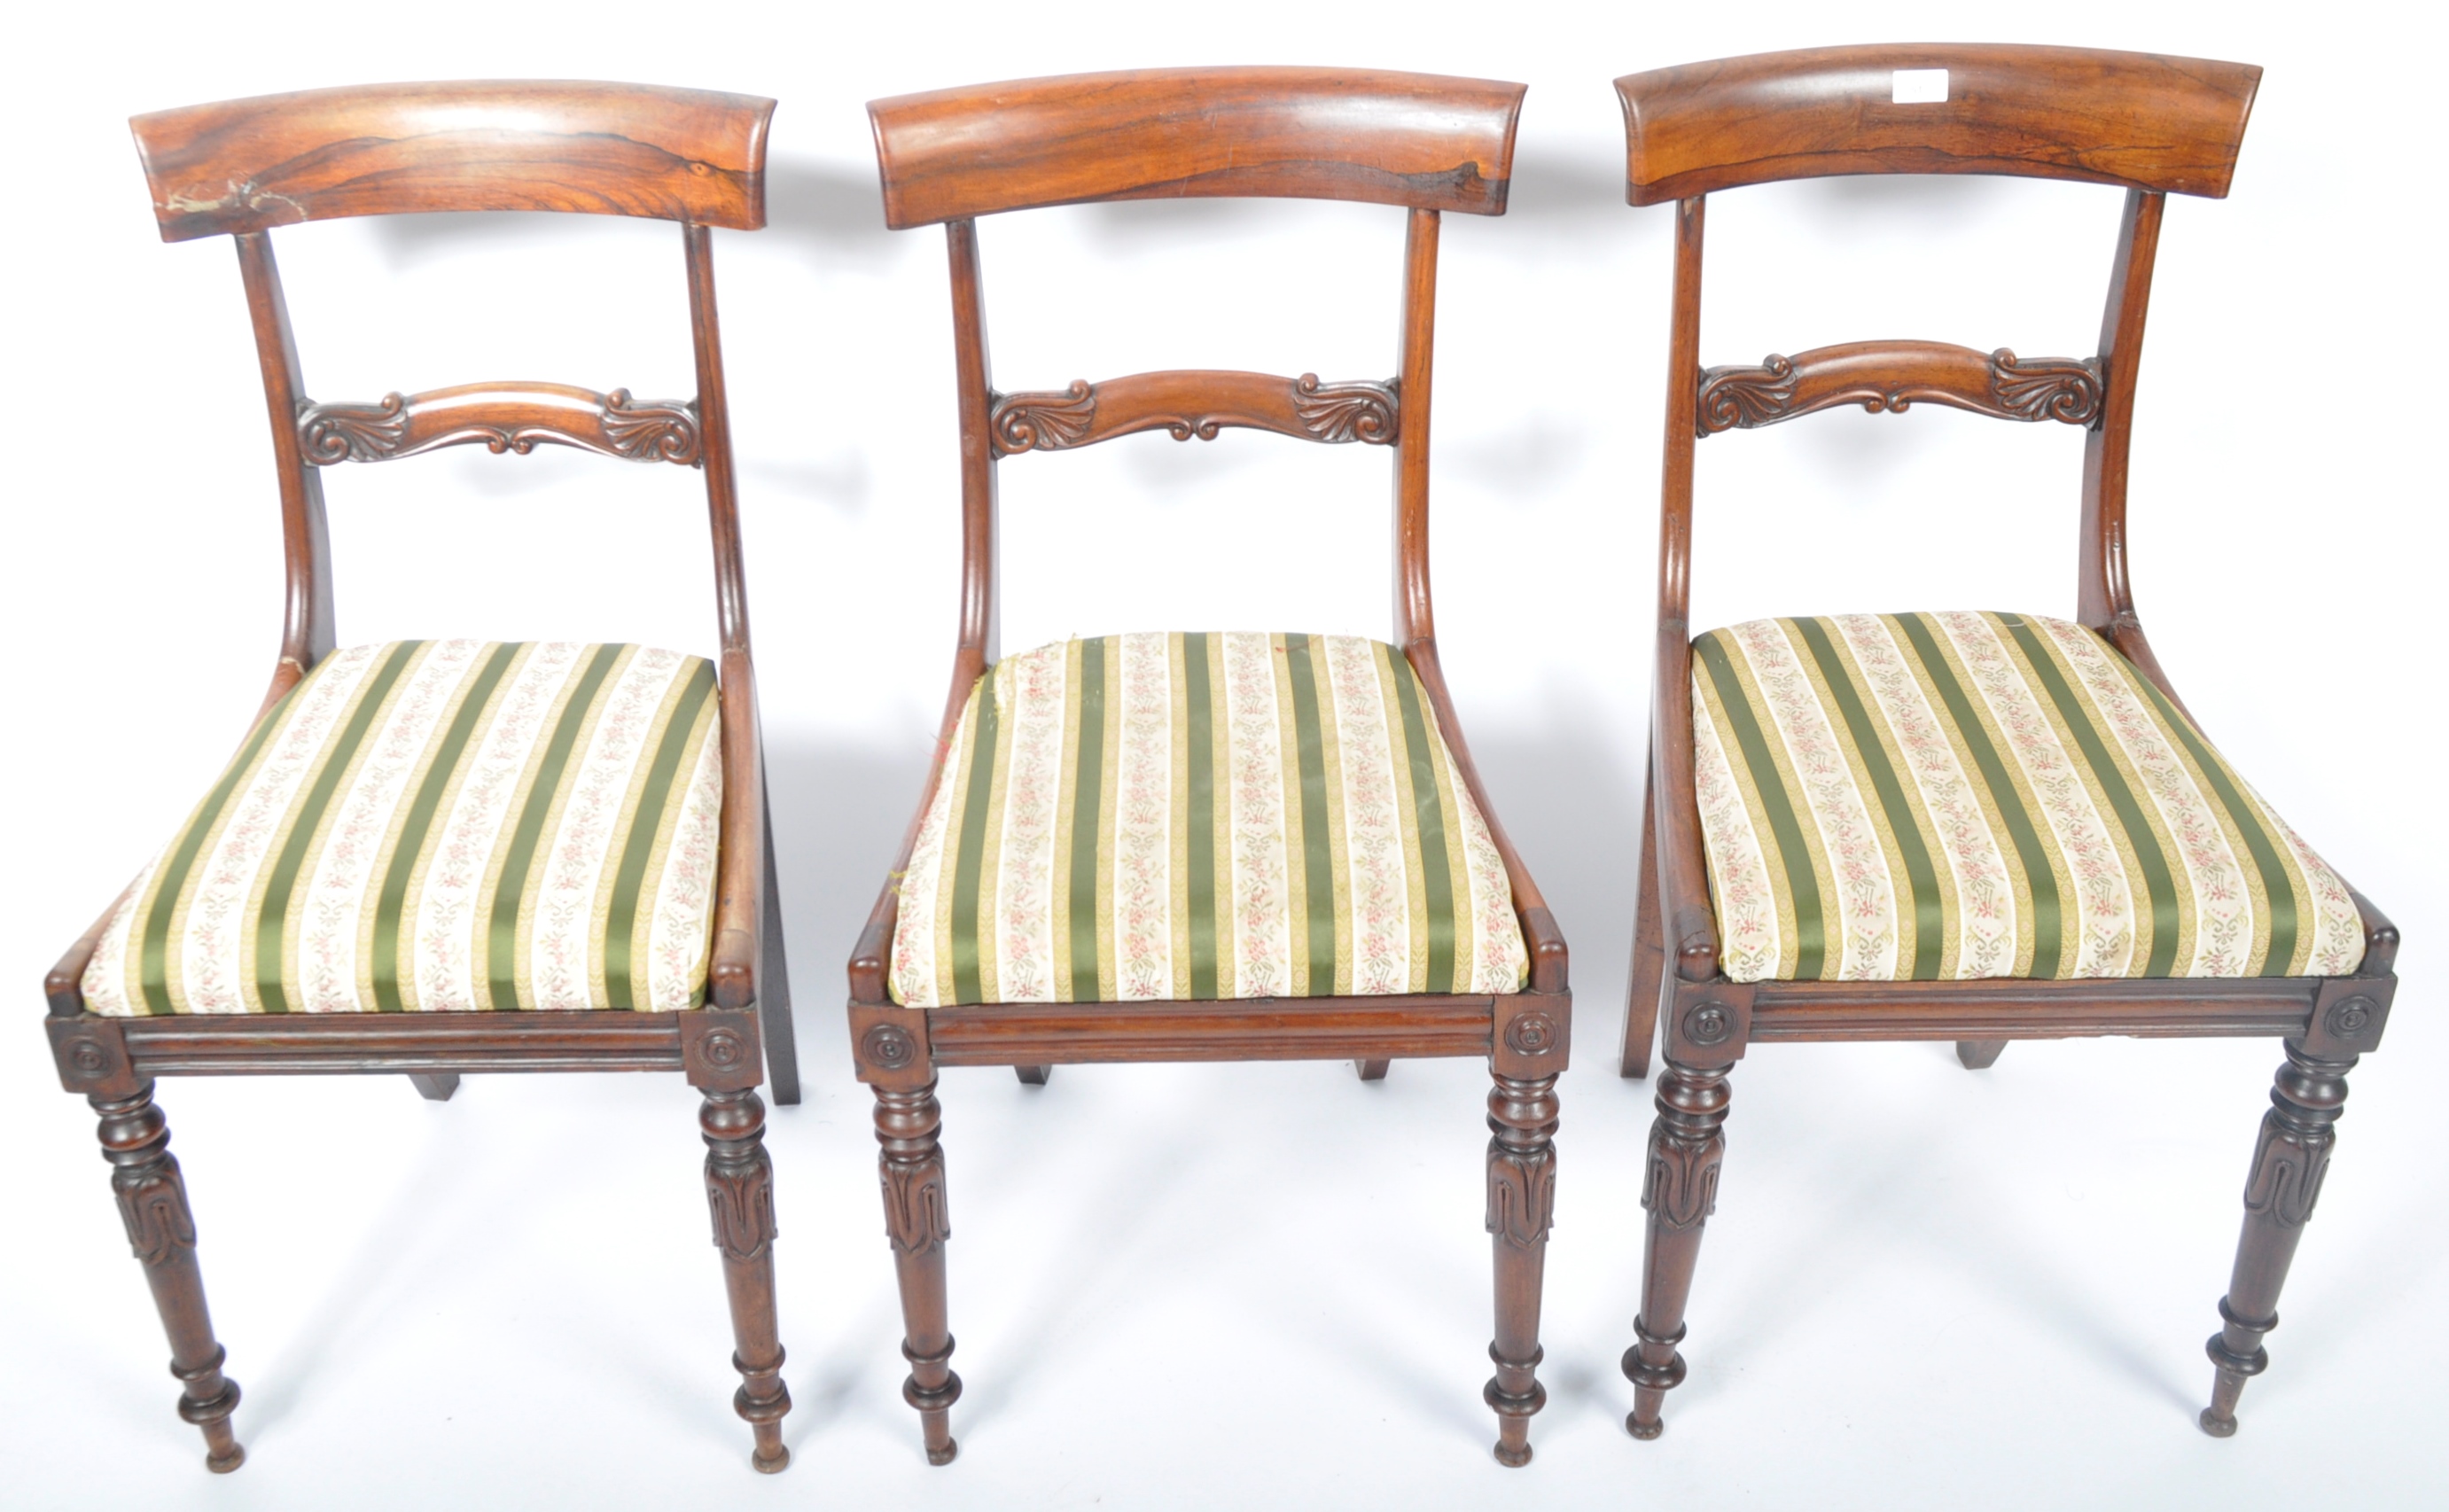 SIX 19TH CENTURY ROSEWOOD DINING CHAIRS IN THE GILLOWS MANNER - Image 5 of 11